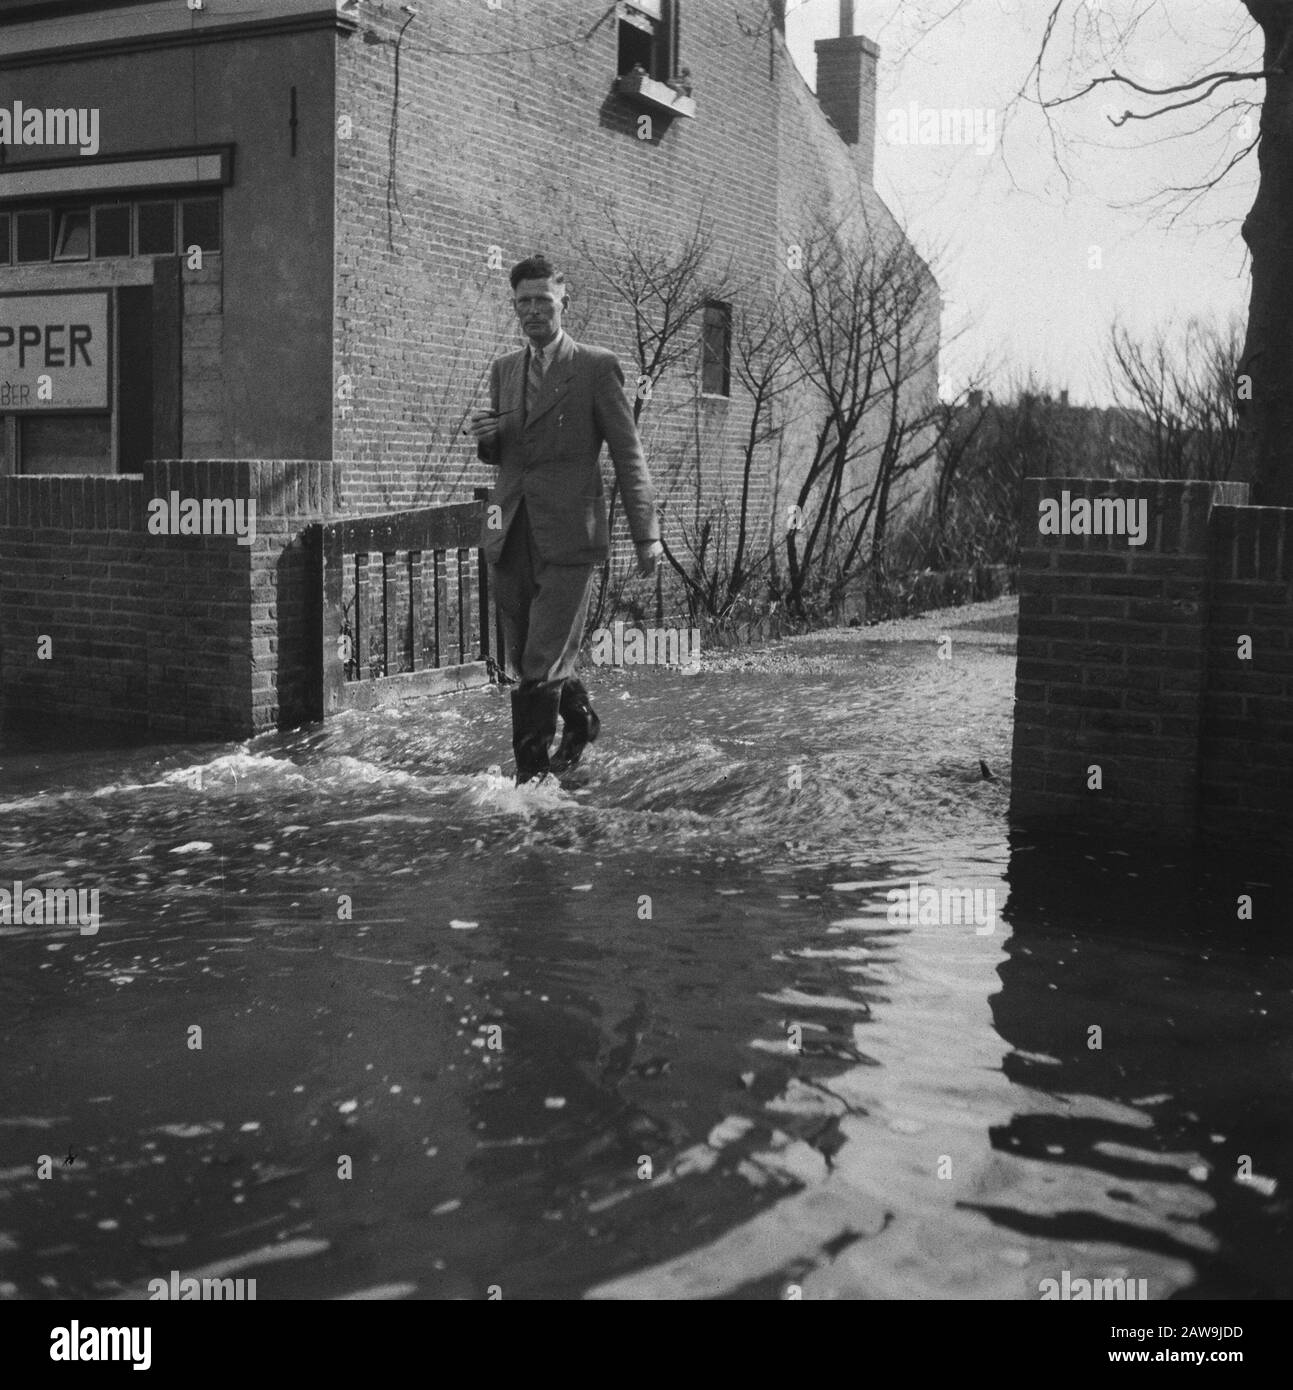 Walcheren: Repair Nolle Gap in the seawall and other places in Walcheren description: Man with boots walking across a flooded driveway Date: 1945 Location: Walcheren Keywords: restoration, second world war, reconstruction Stock Photo